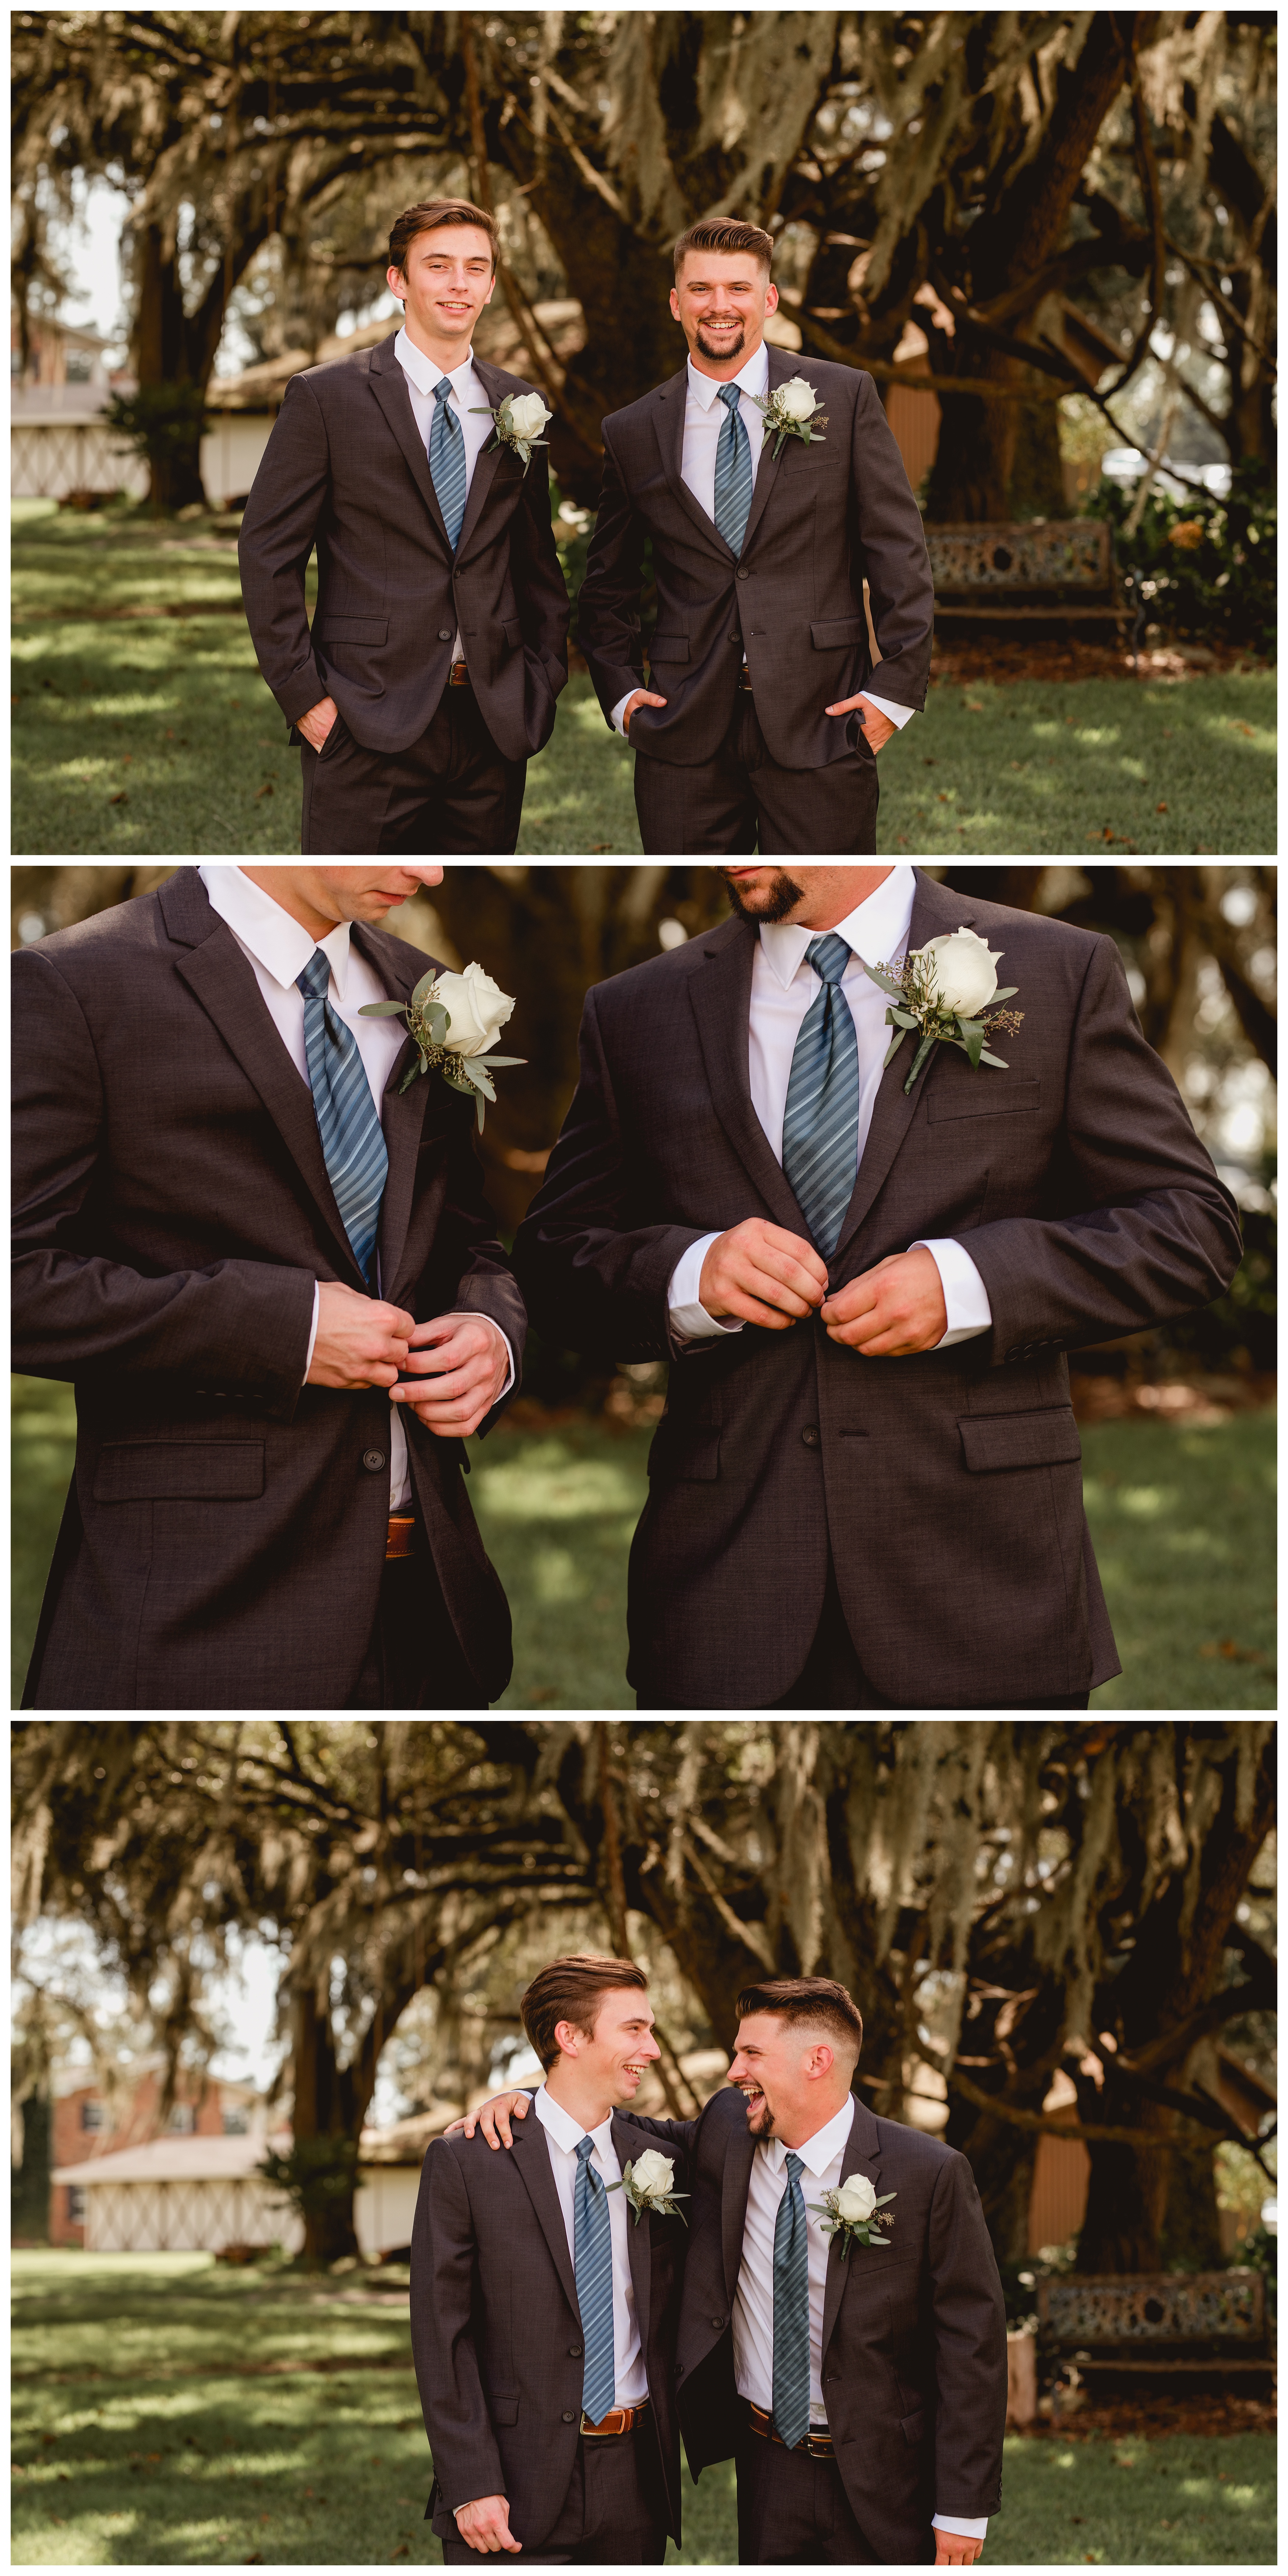 Groom and his best man get ready together in North Florida. Wedding photographer Shelly Williams.